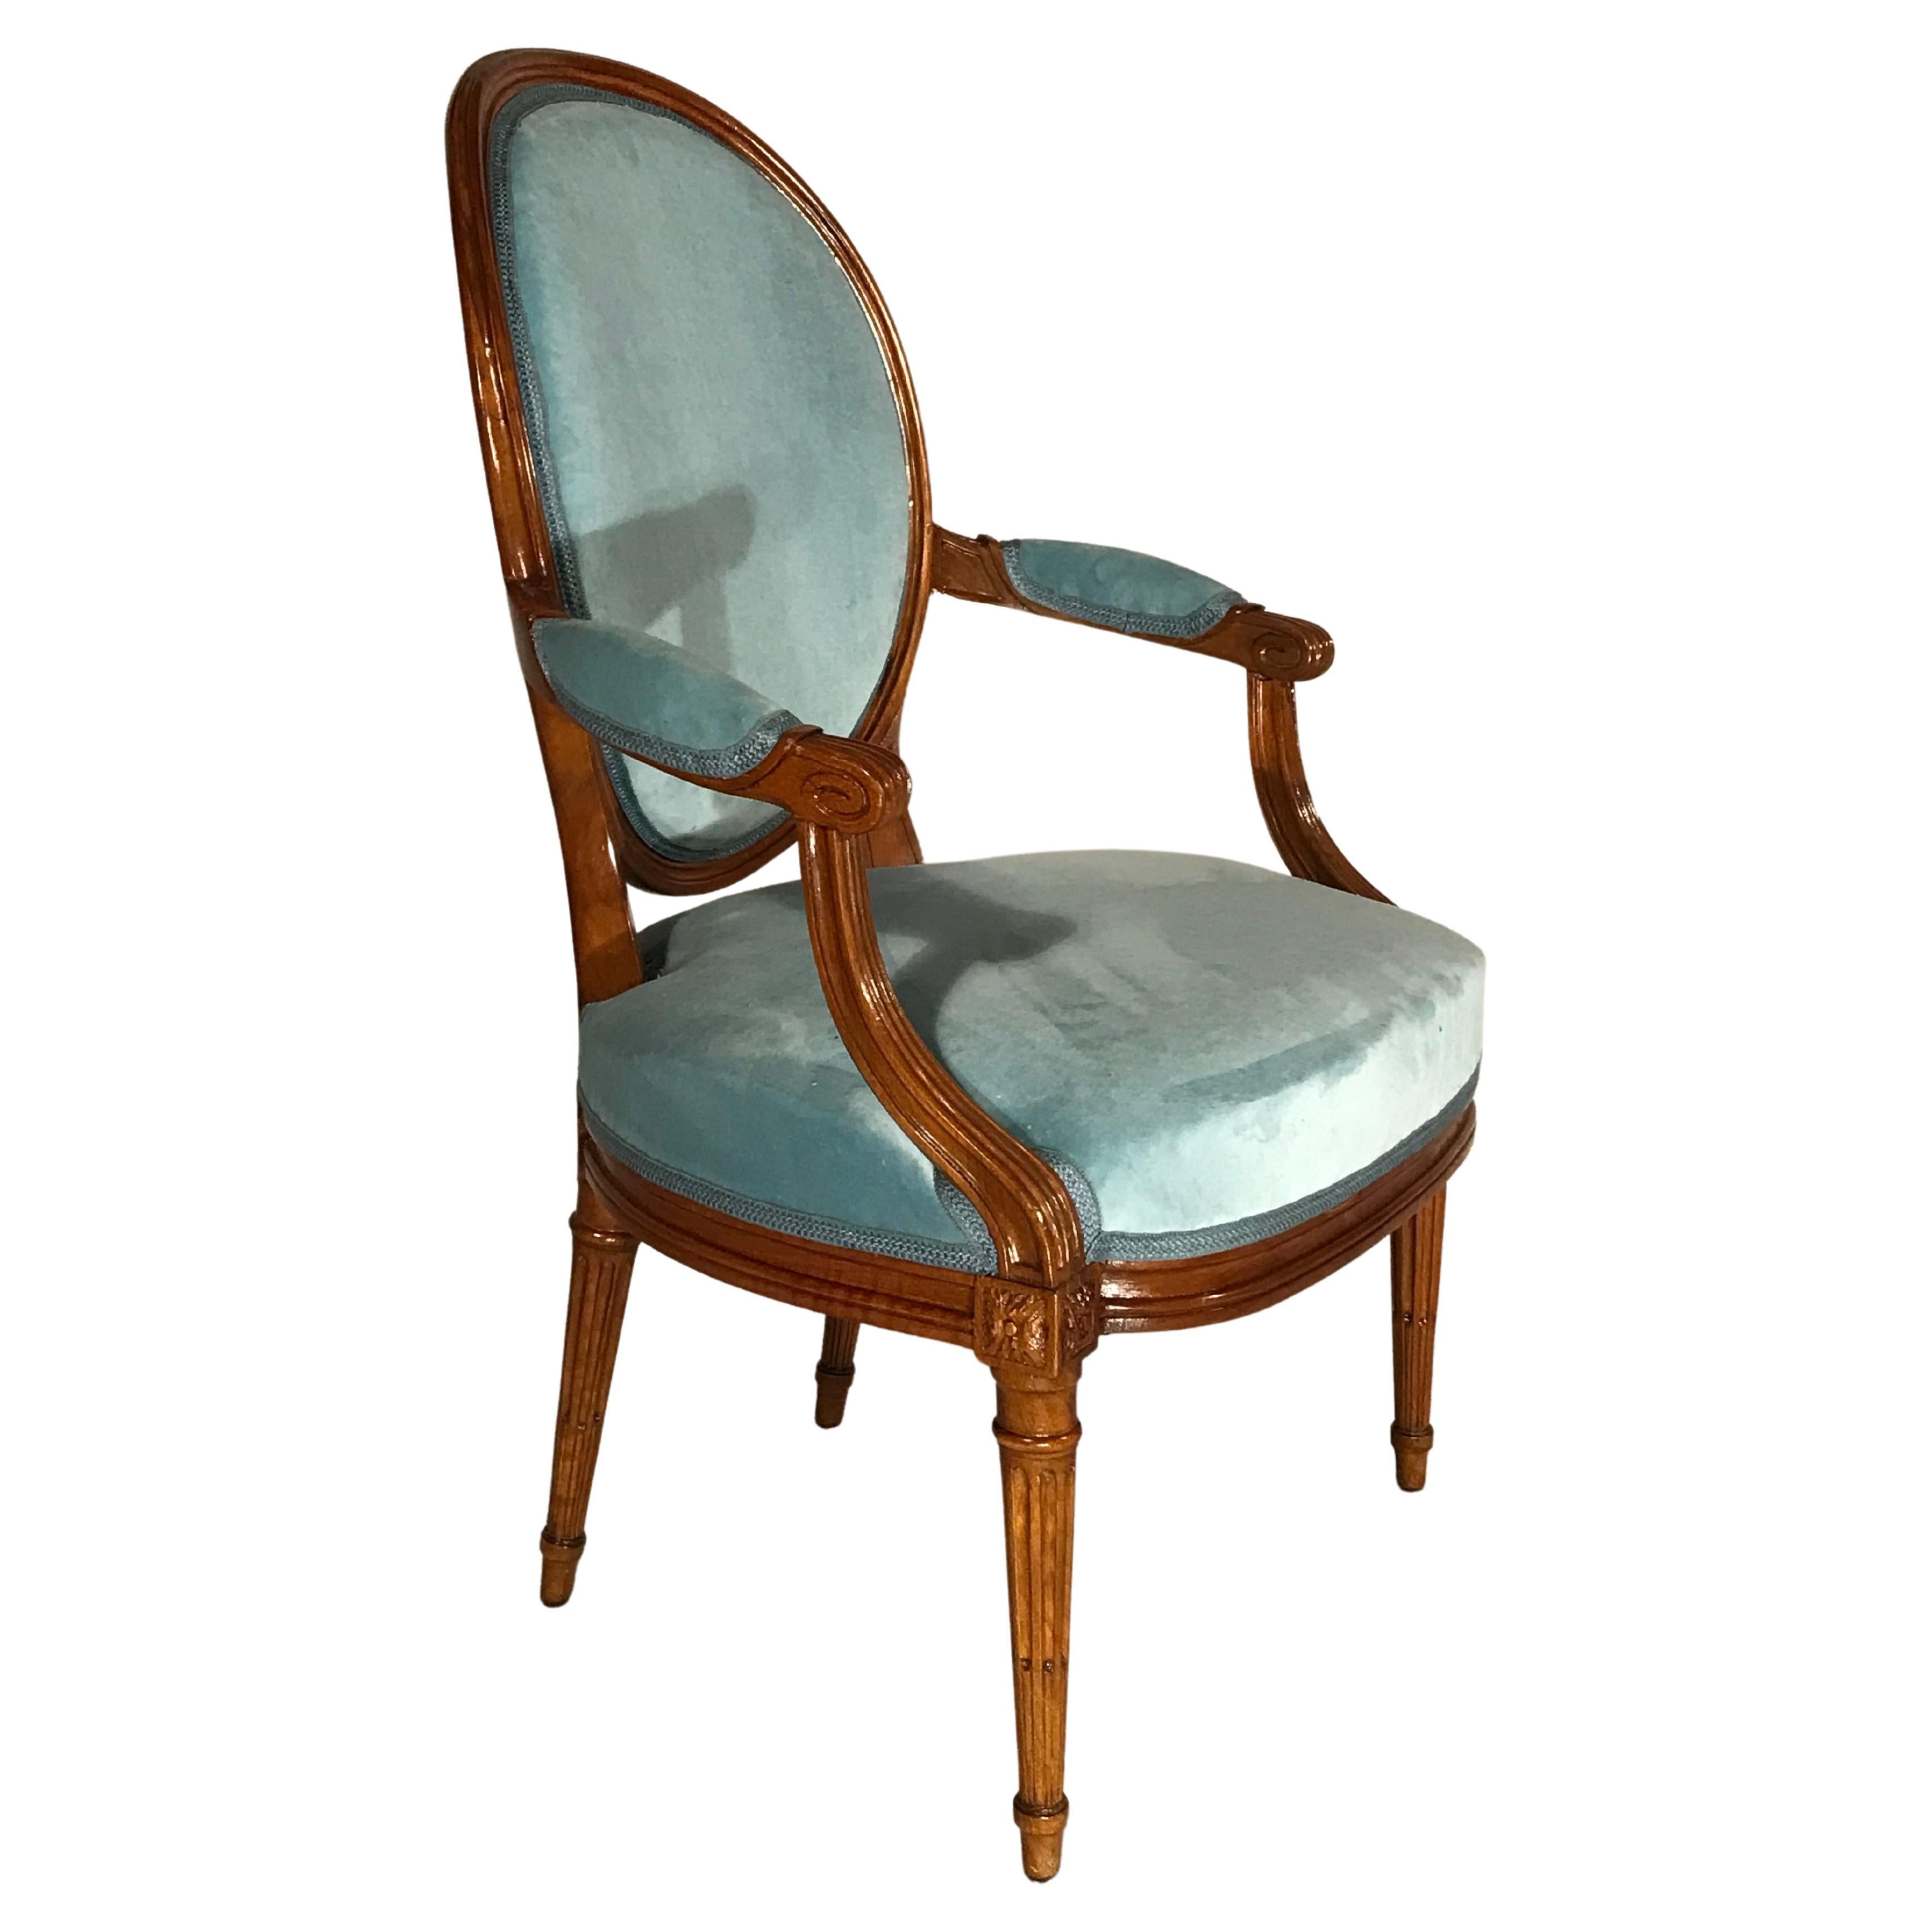 This set of four original Louis XVI armchairs dates back to around 1830 and comes from France. The elegant armchairs have an oval shaped backrest, The four fluted legs are connected to the slightly curved armrests. The chairs have beautifully carved